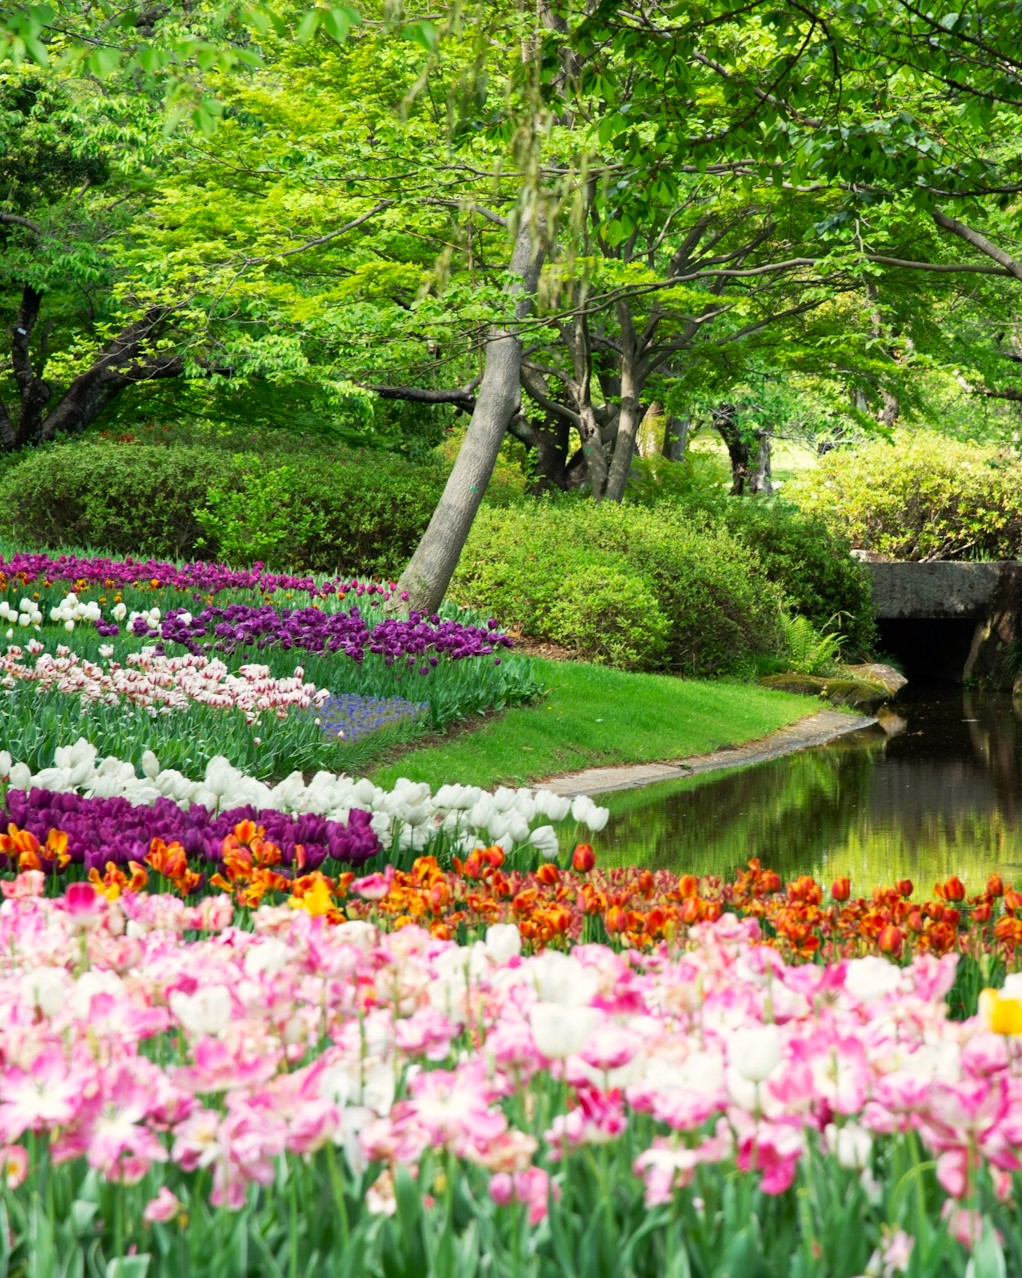 Garden beds in a park with colourful flowers and trees in the background. River flowing on the right side.